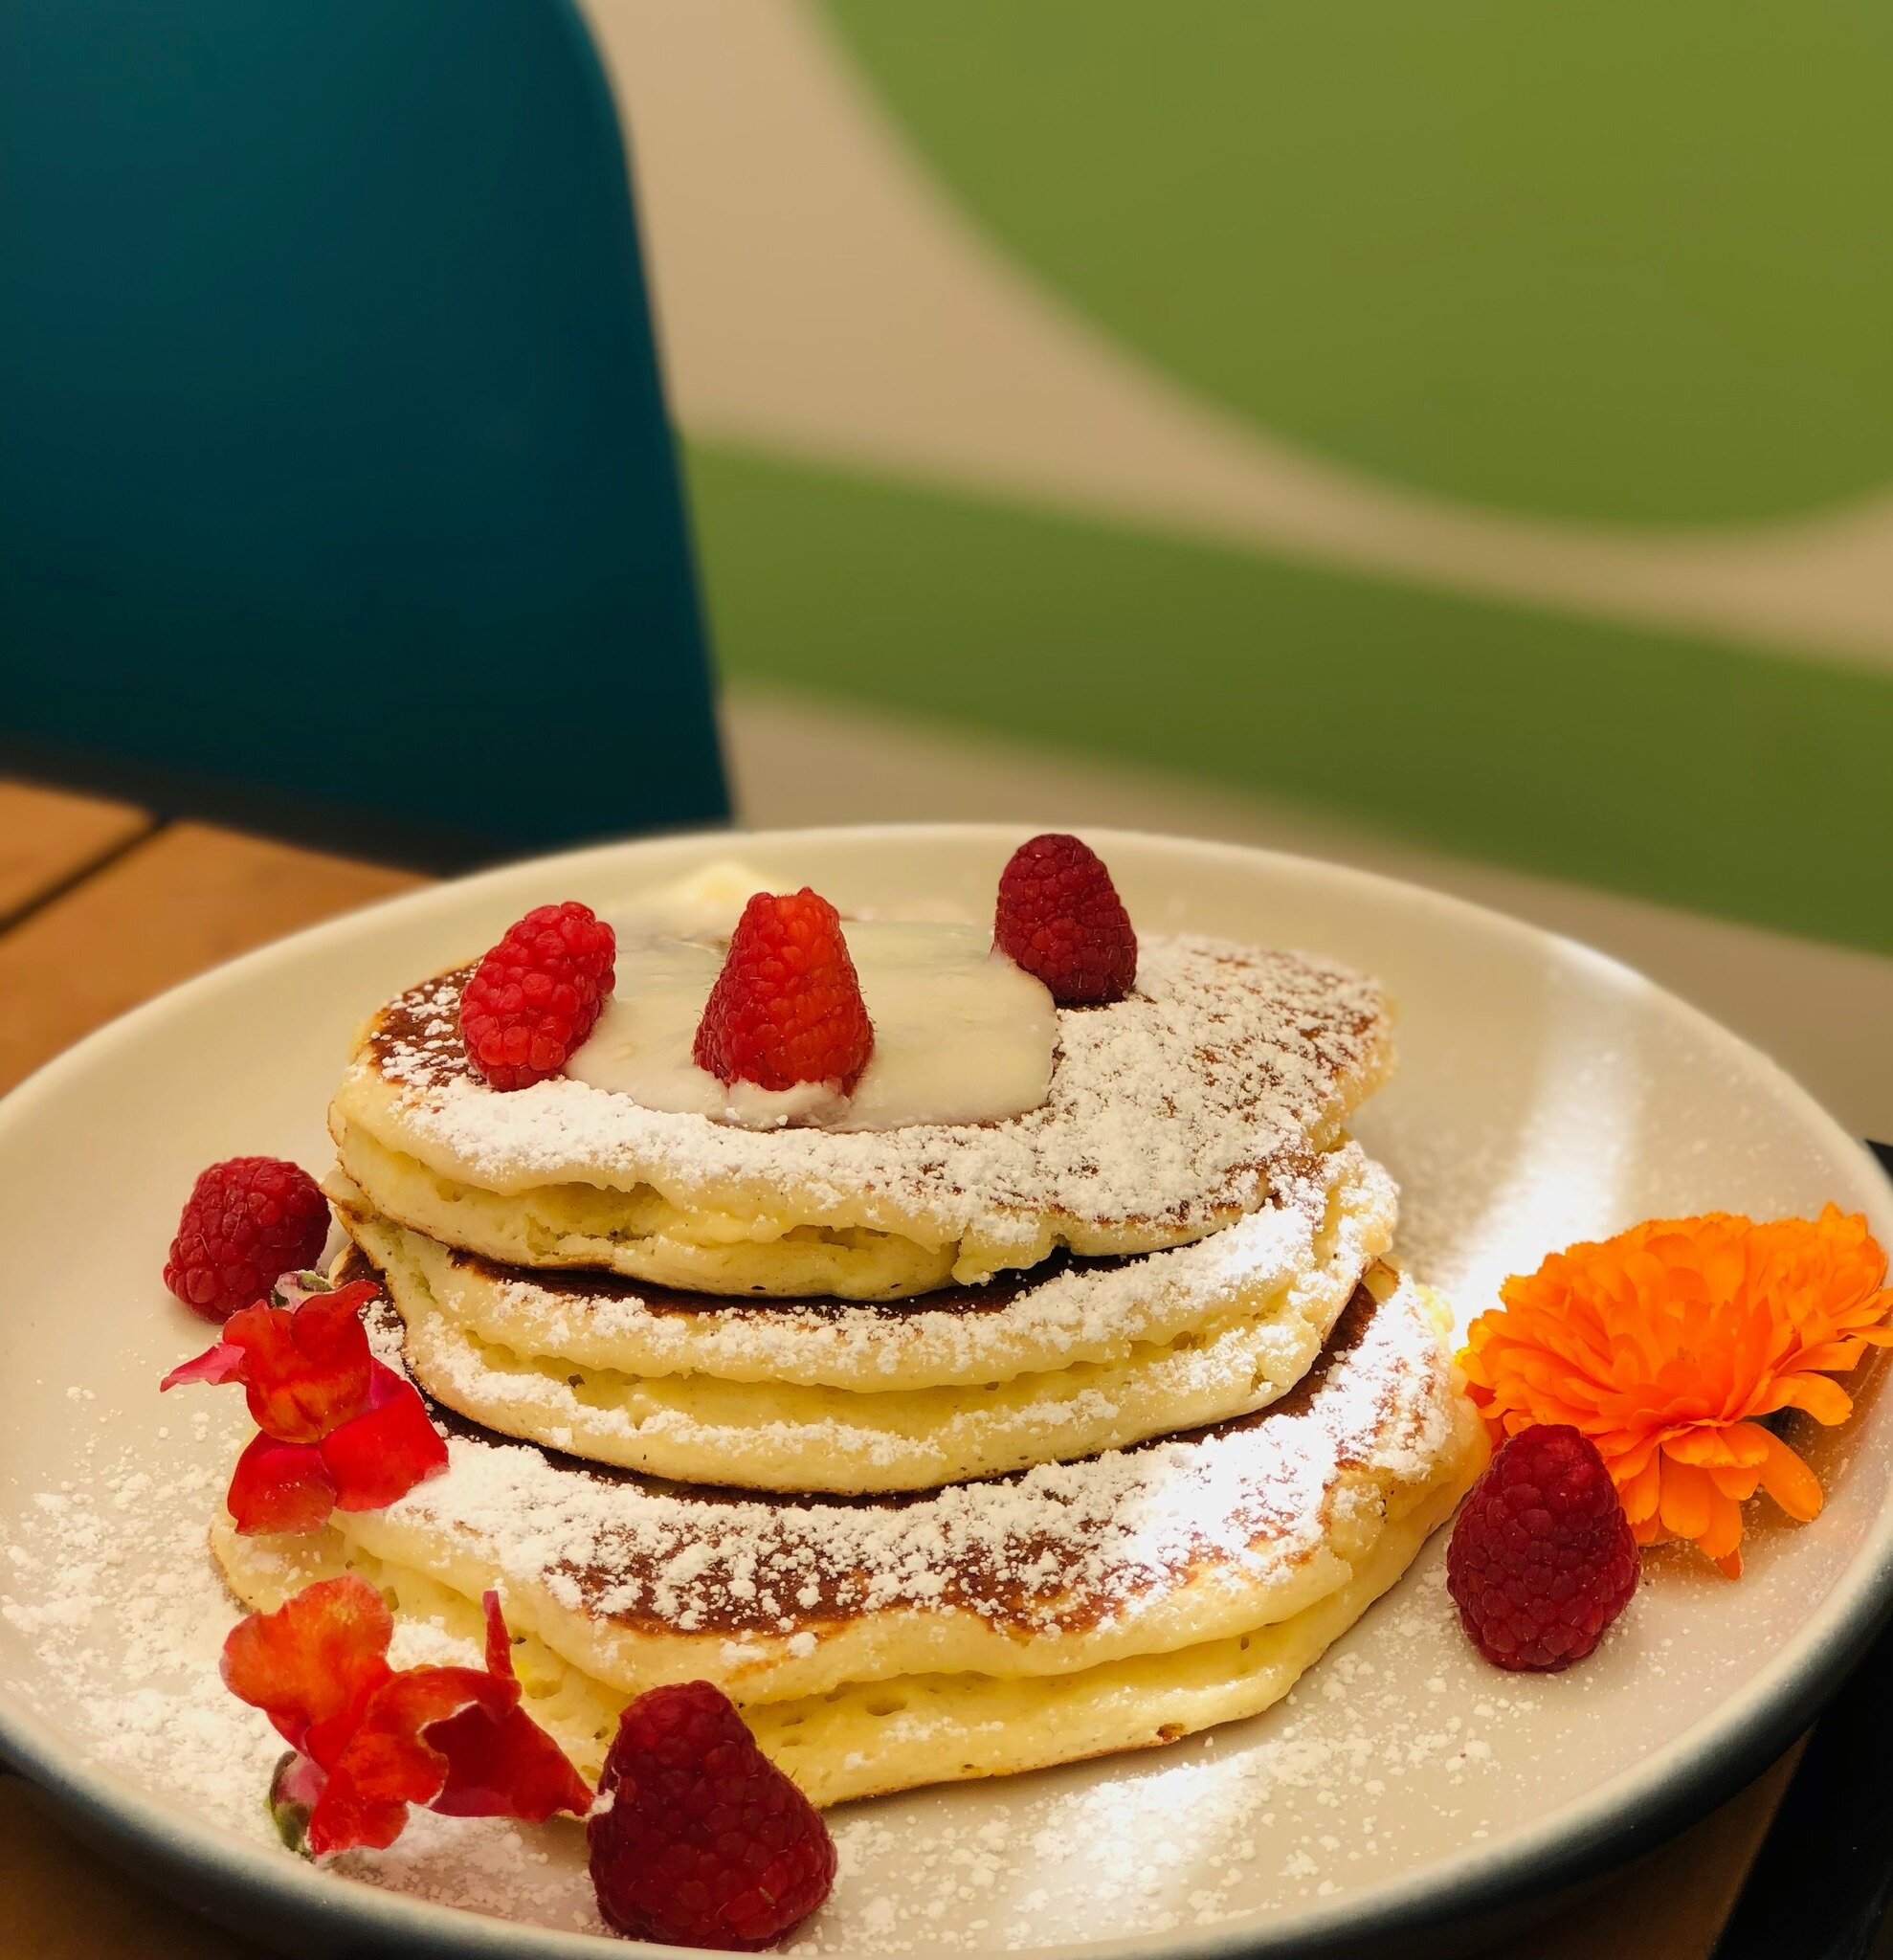 Just another delicious reason to celebrate the Moms in your life, Lemon Ricotta Pancakes served with our freshly squeezed juice! Open Mother's Day 6:00AM-2:00PM.